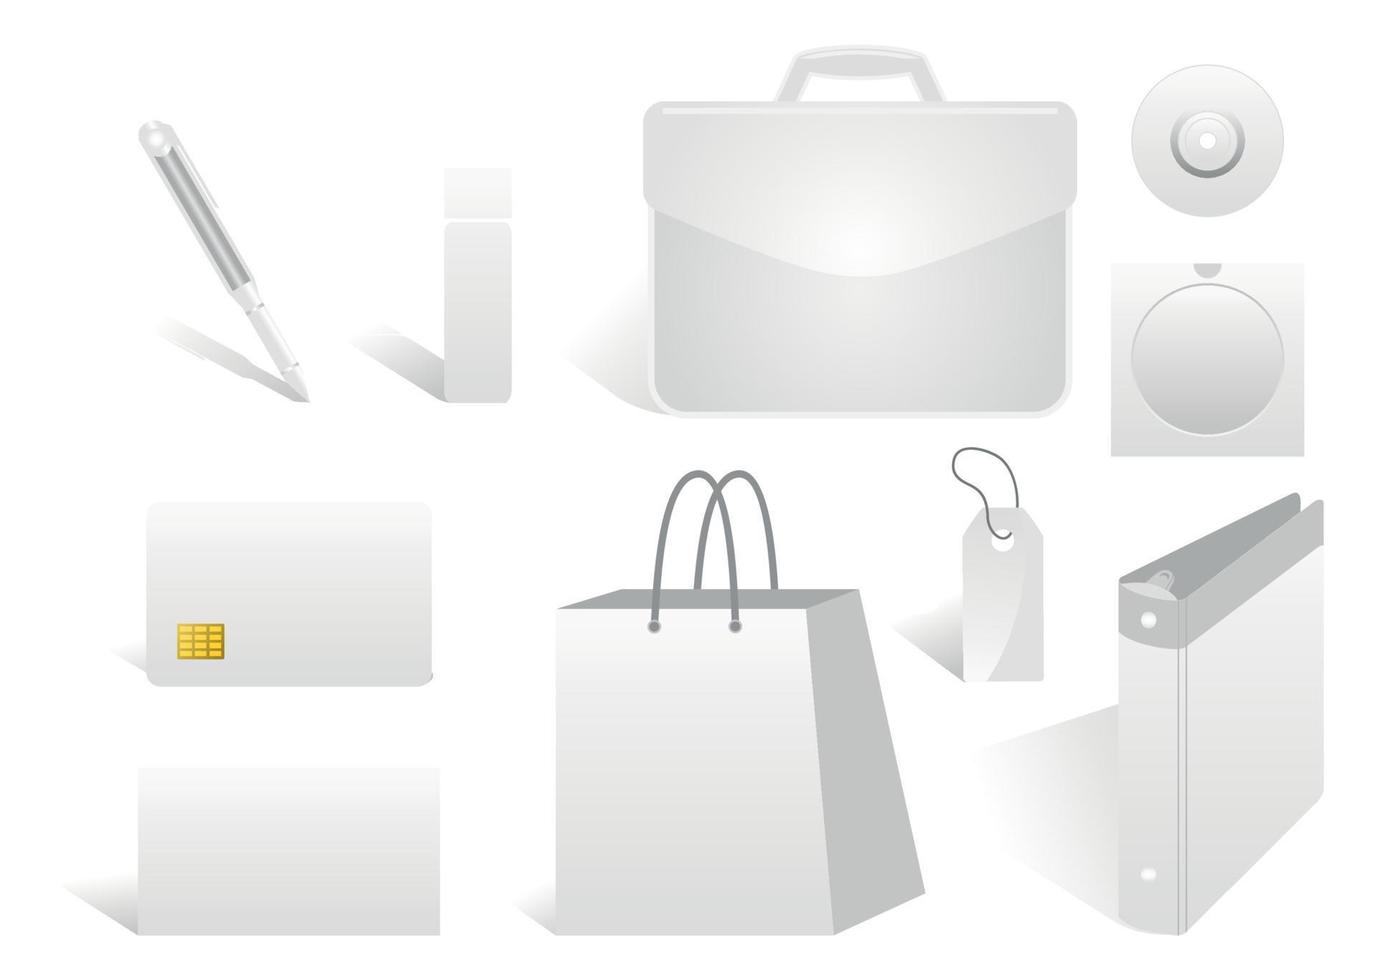 Different kinds of carriers of advertising. A vector illustration